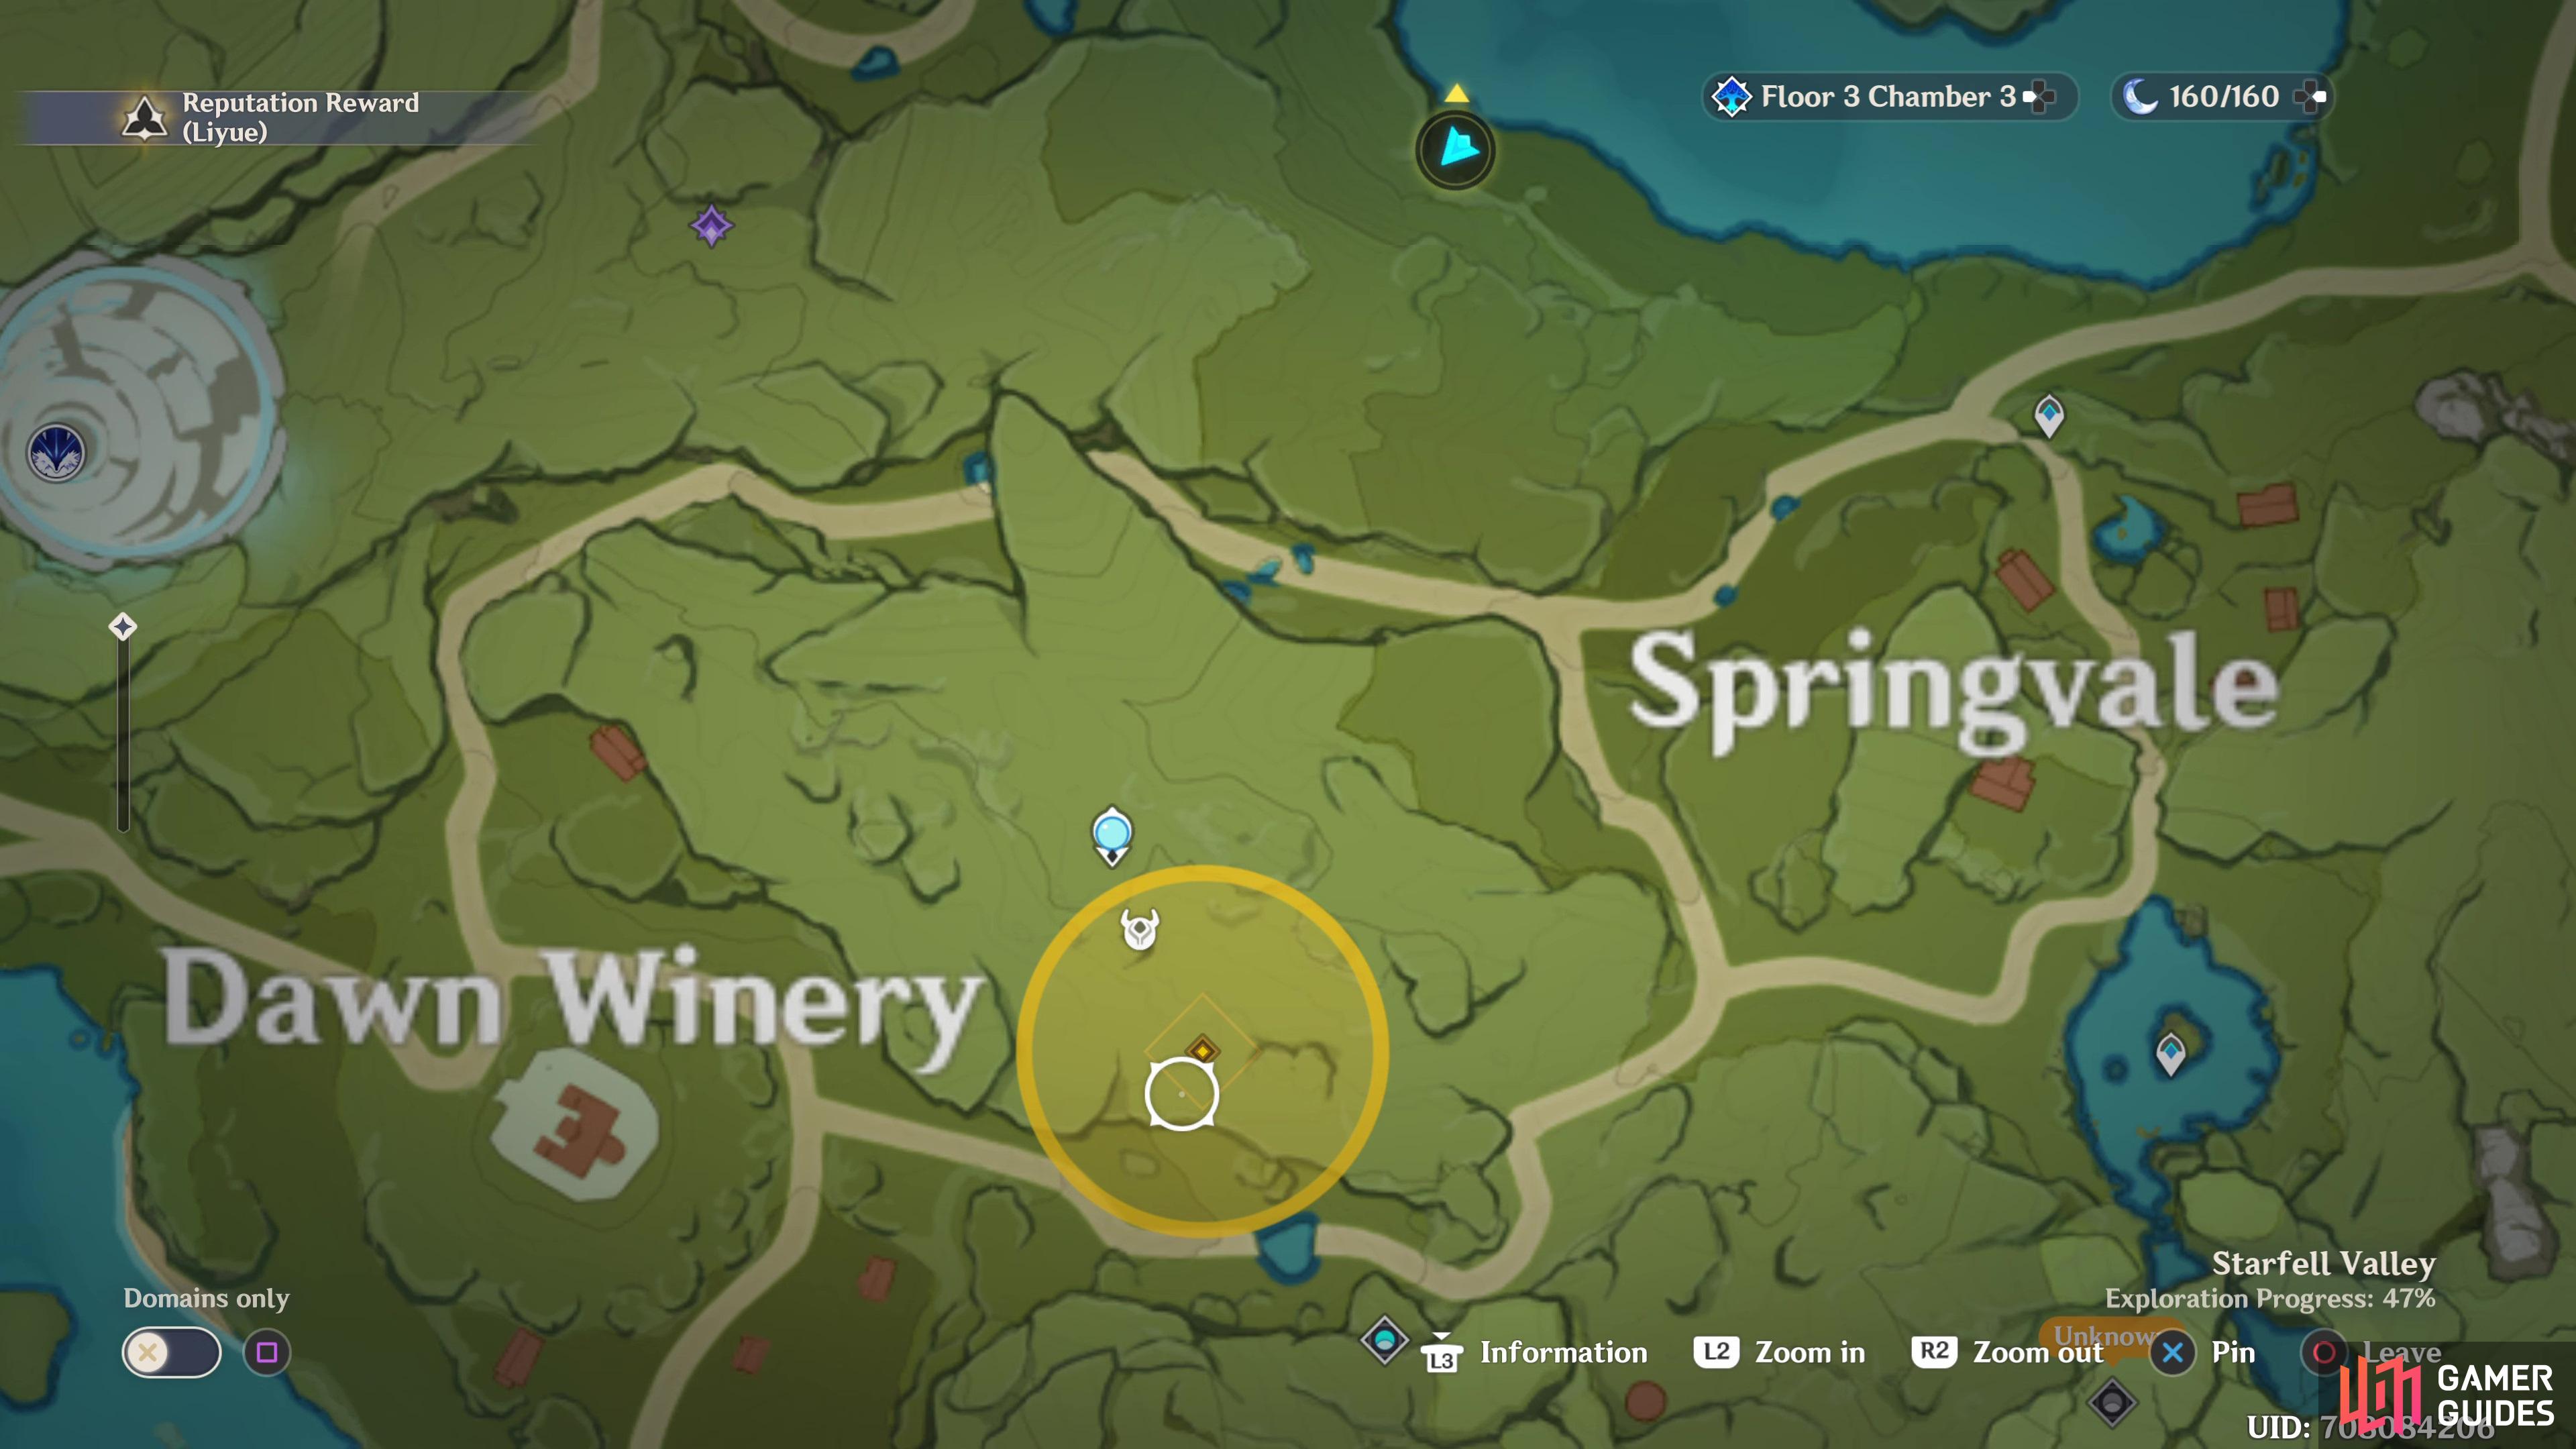 then go to the this location on the map and tak e out the three treasure hoarders.